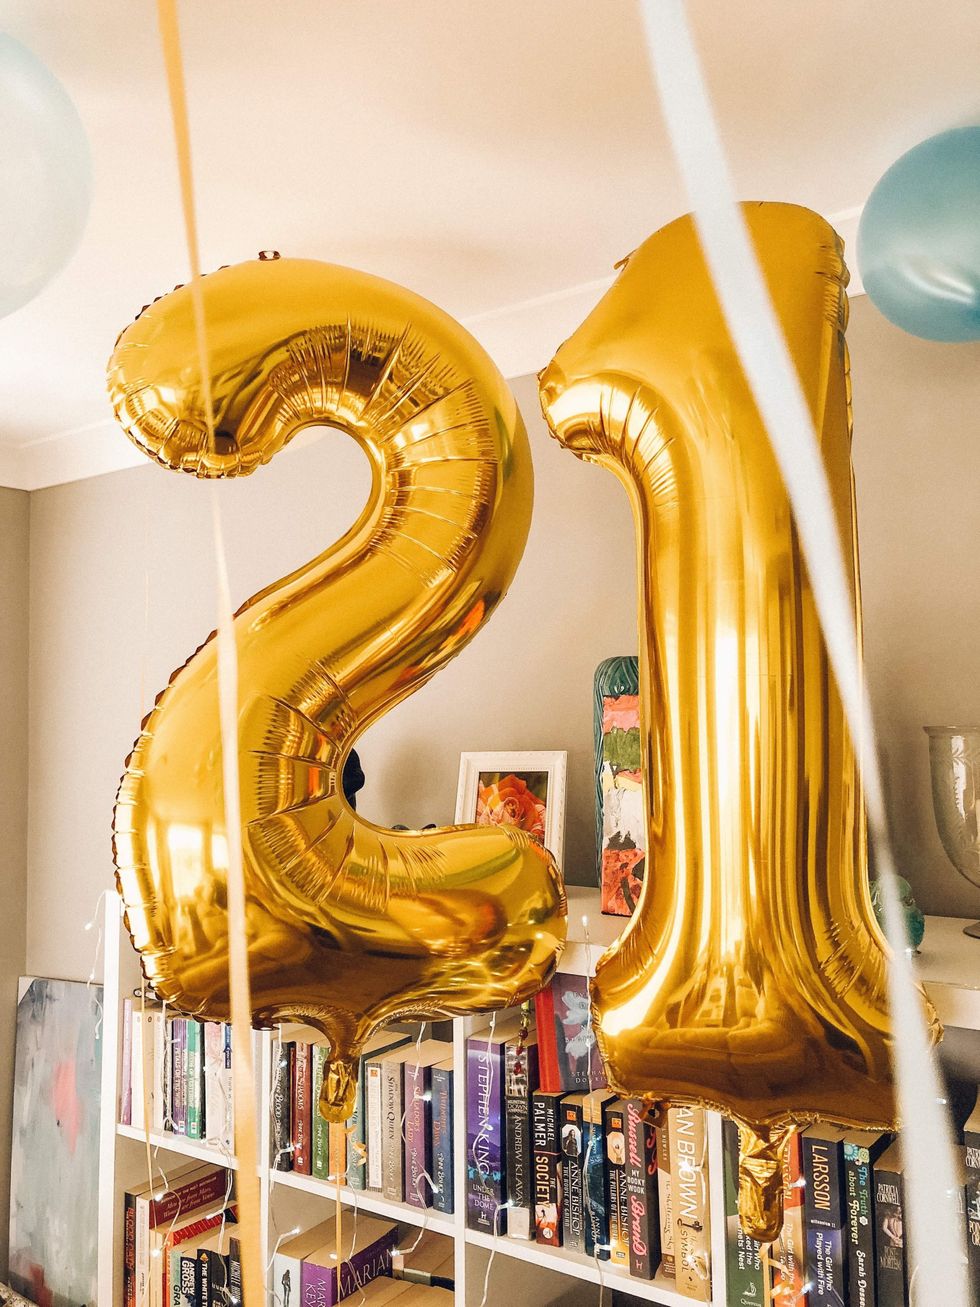 My 21st In A COVID-19 World: Why I'm Not Really Celebrating